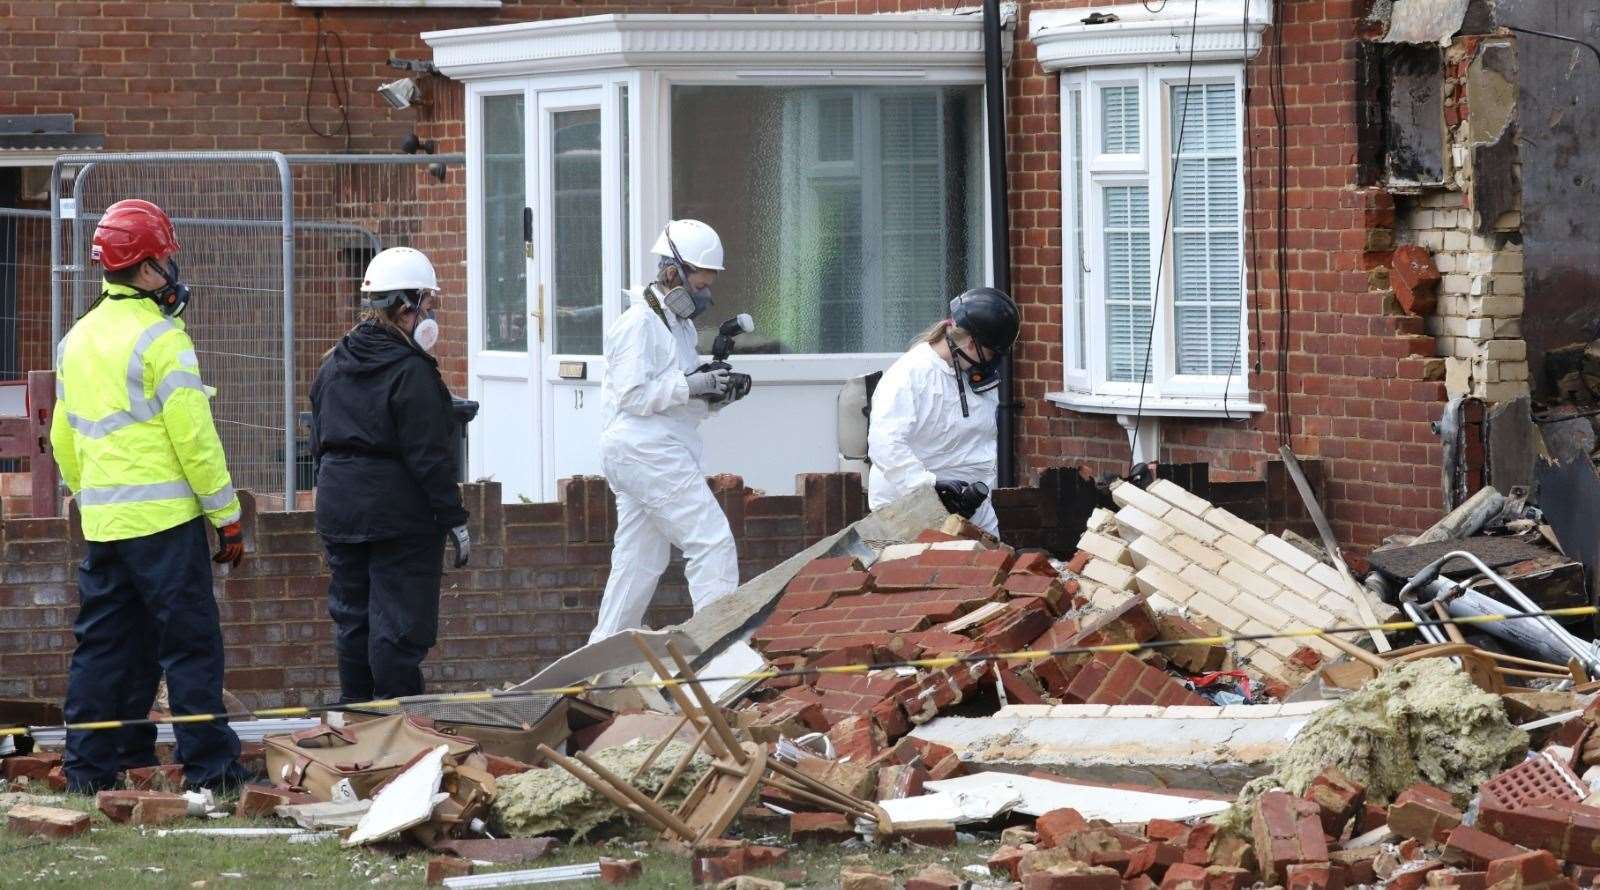 Forensics at the scene of the explosion in Mill View